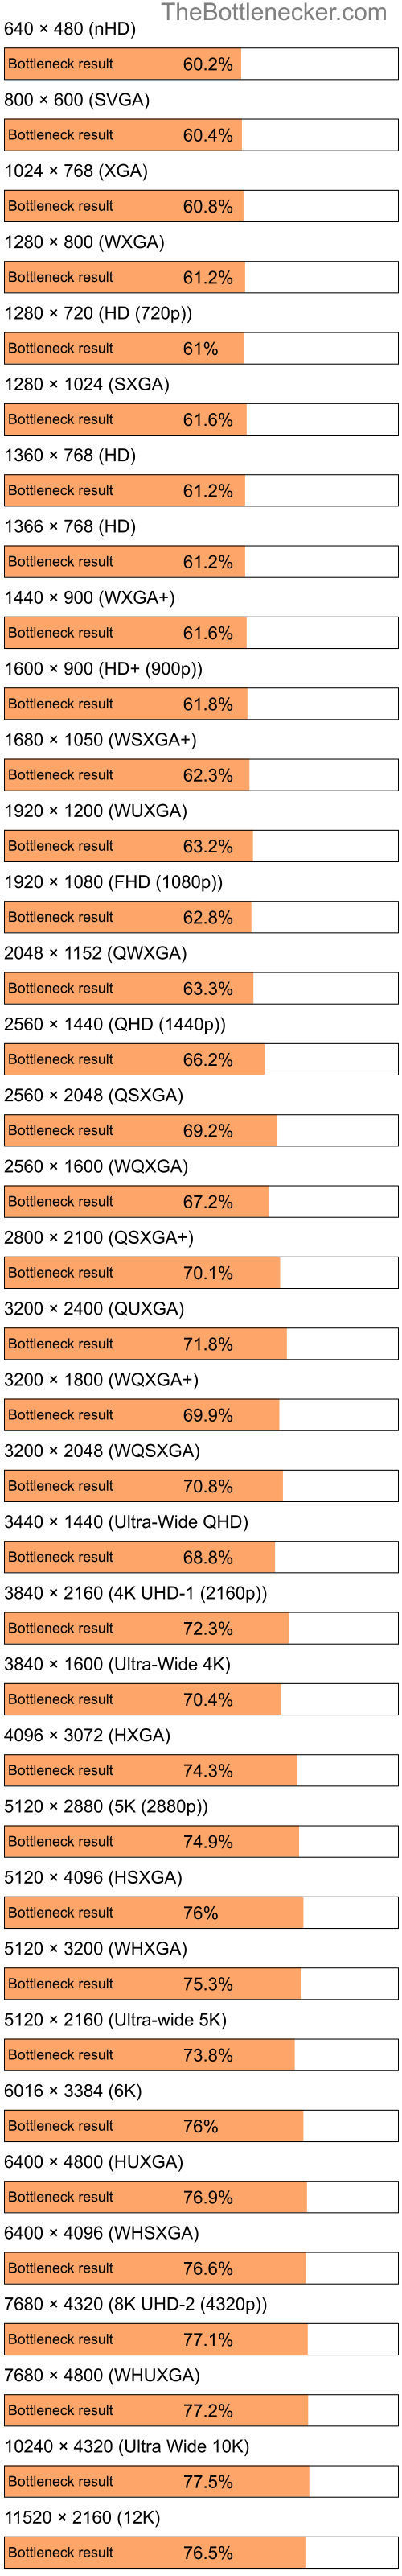 Bottleneck results by resolution for Intel Celeron and AMD Mobility Radeon X700 in Processor Intense Tasks